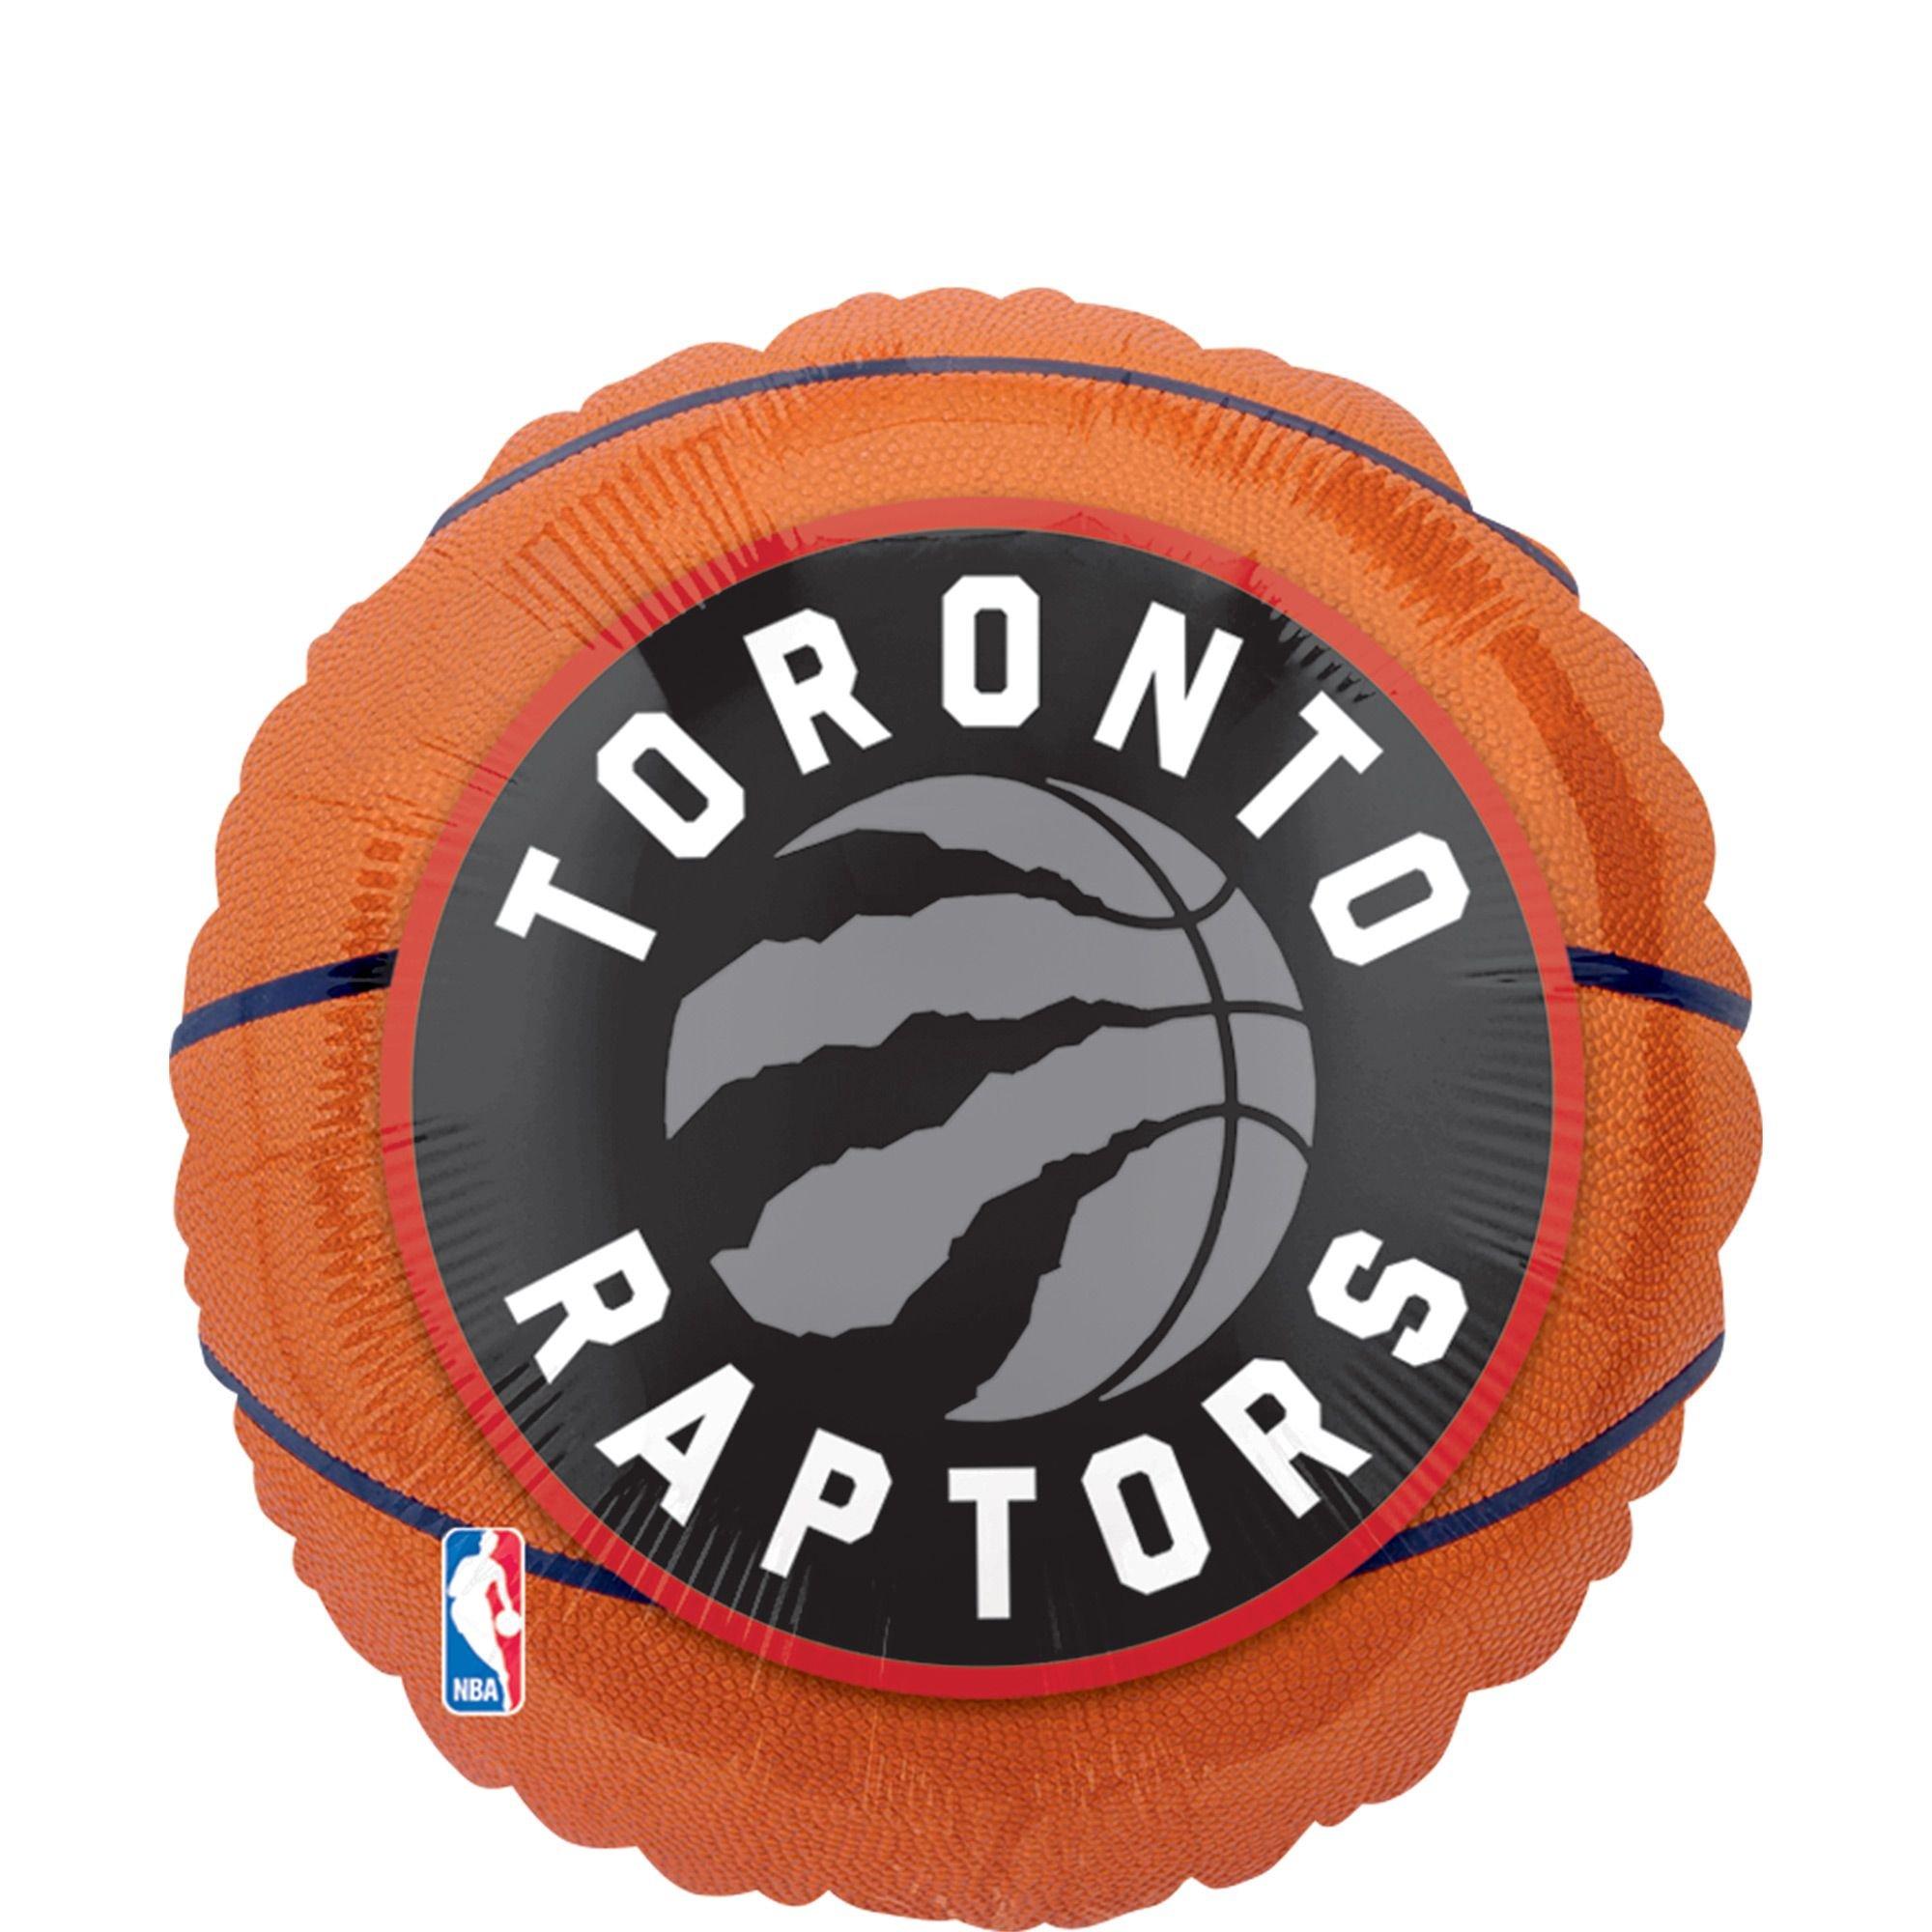 This is what the Toronto Raptors dressed as for Halloween